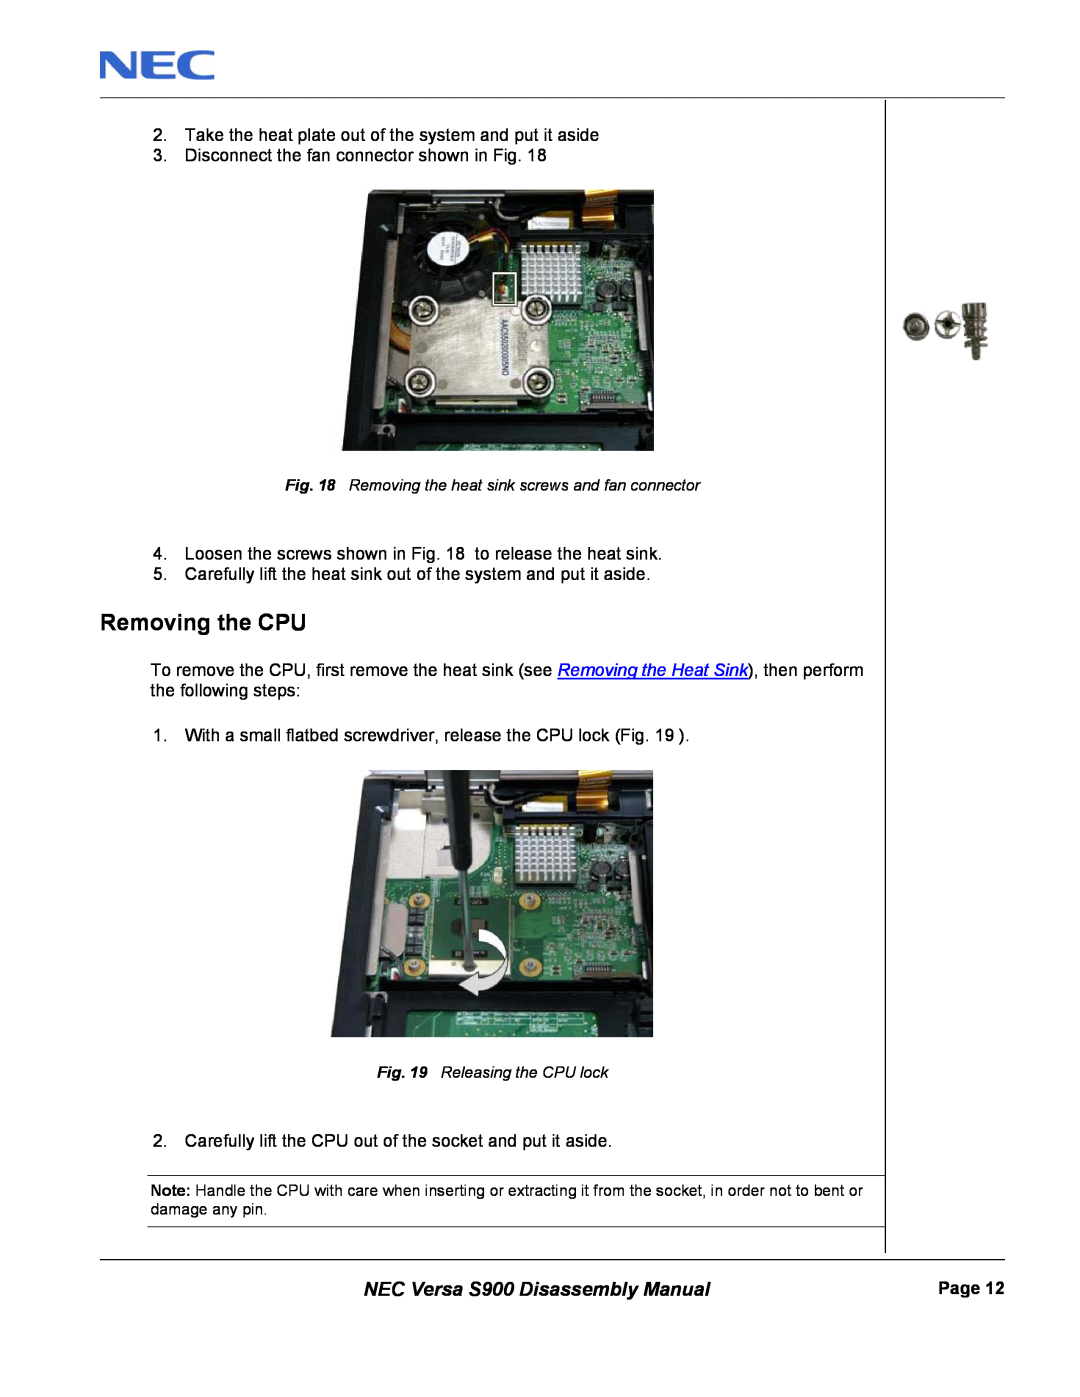 NEC manual Removing the CPU, NEC Versa S900 Disassembly Manual 